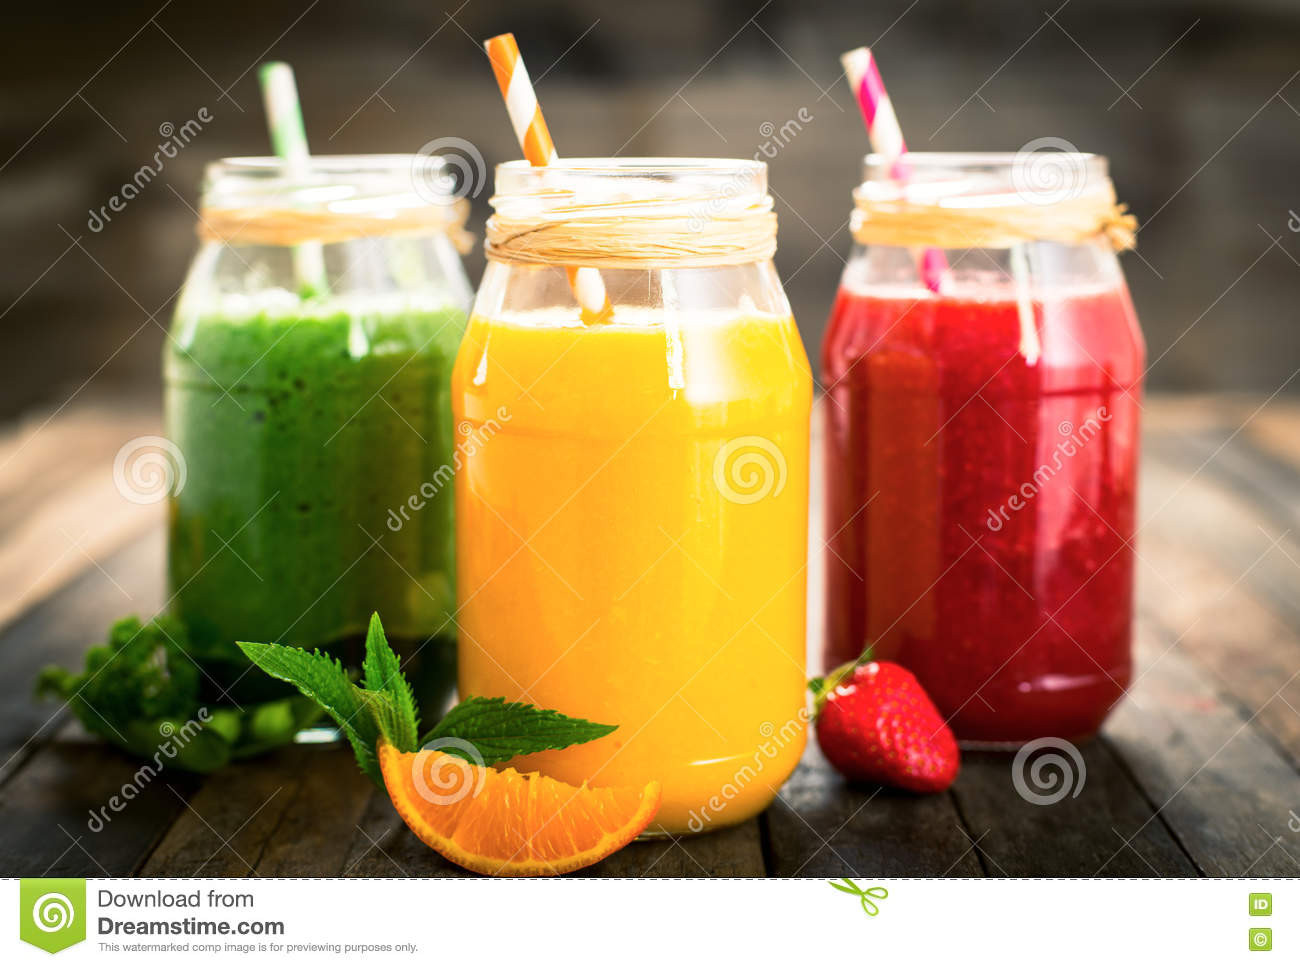 Healthy Fruit And Veggie Smoothies
 Healthy Fruit And Ve able Smoothies Stock Image